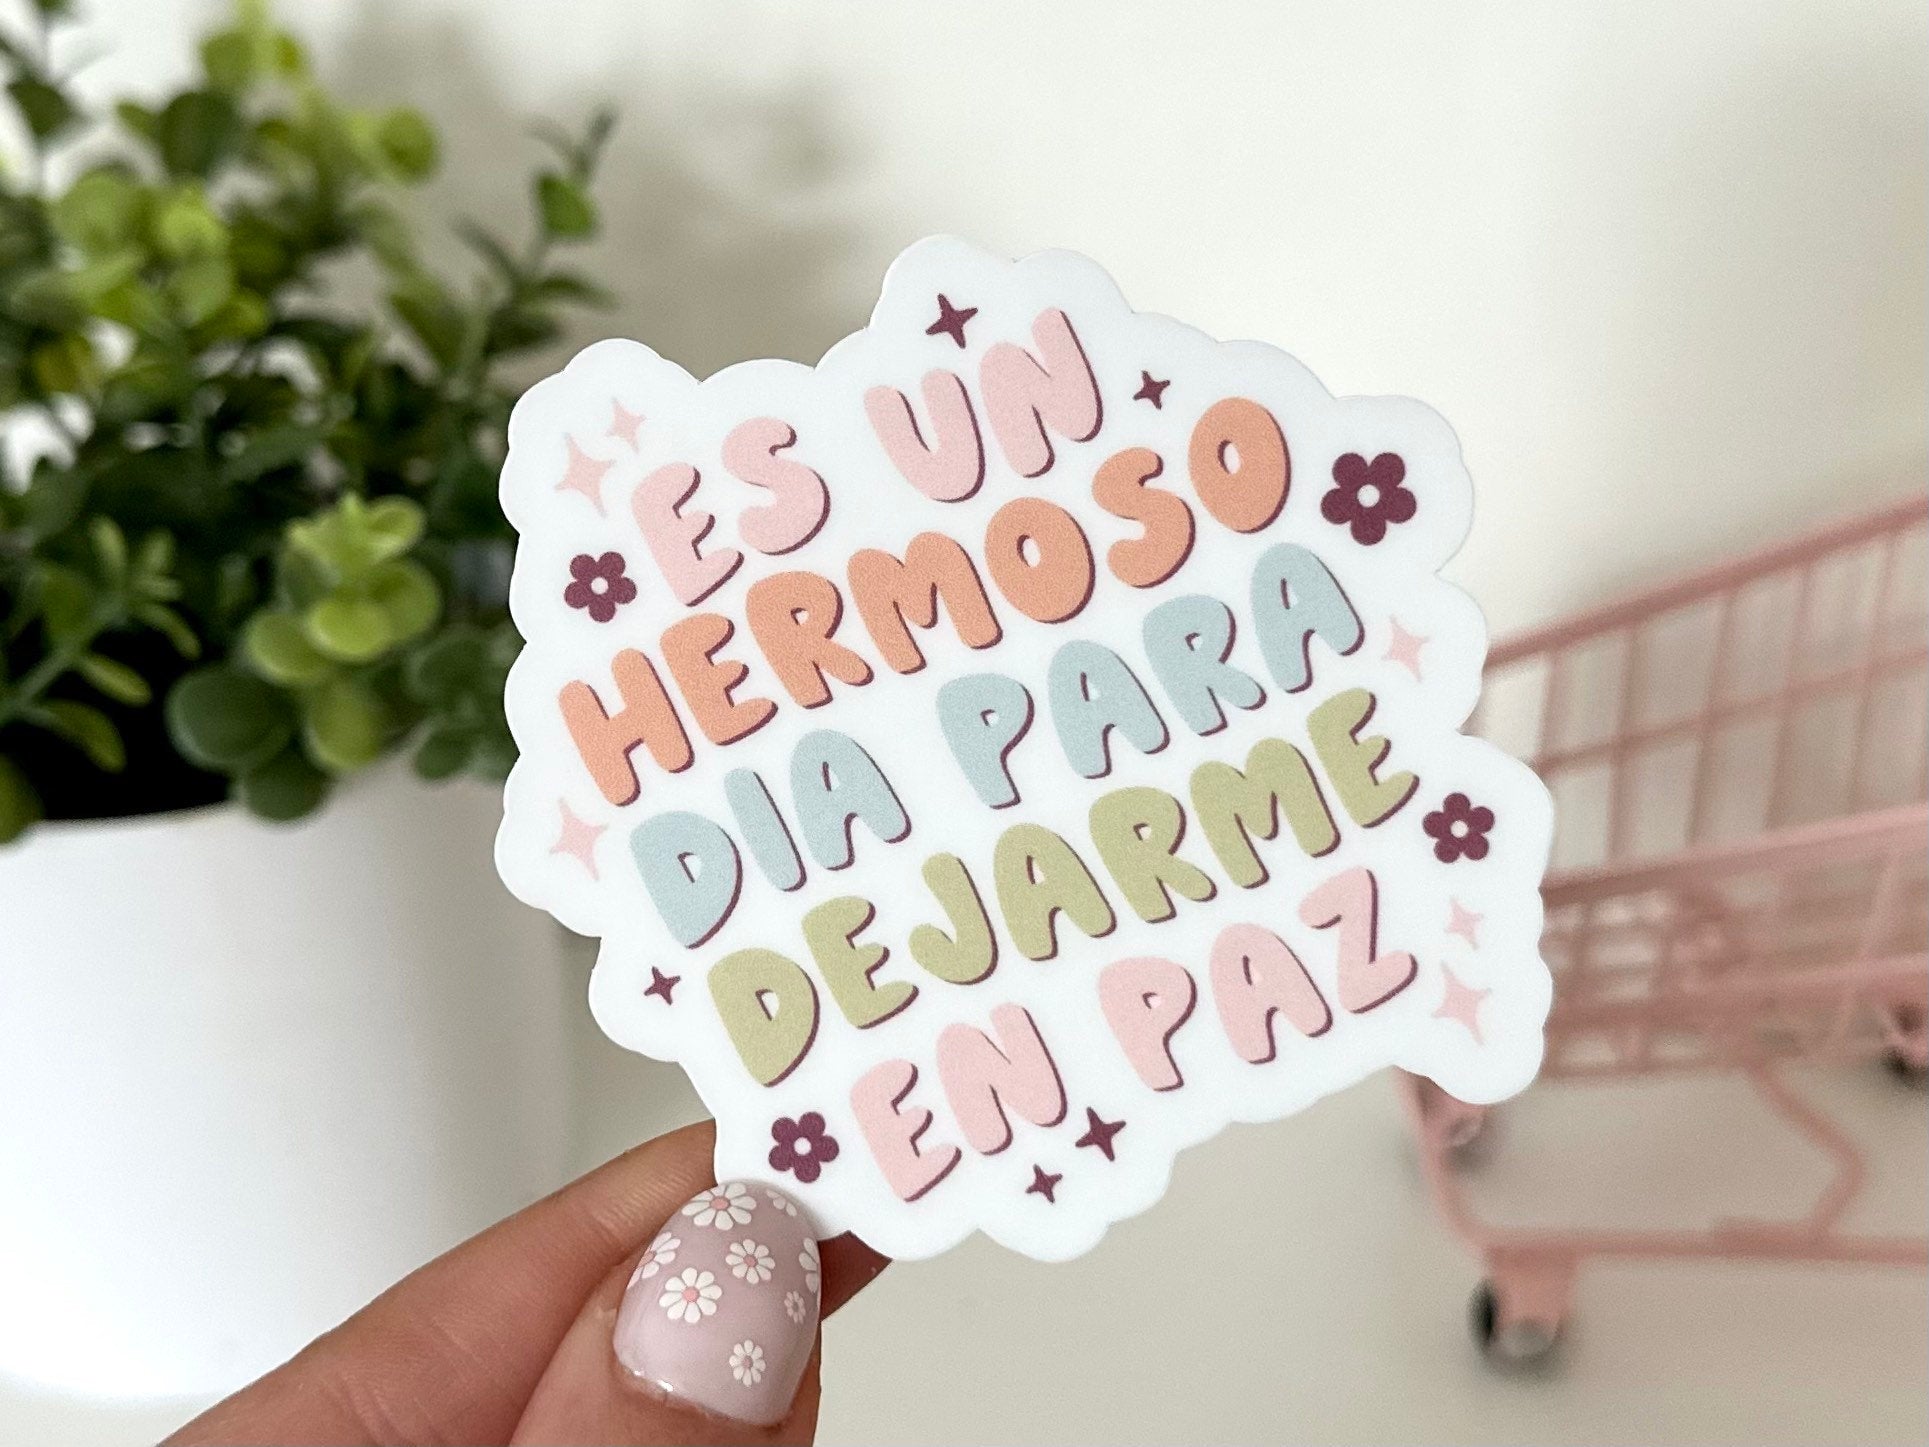 Es Un Hermoso Dia Para Dejarme En Paz Waterproof Sticker, Gifts For Her, Trendy Stickers, Mental Health, Spanish Decal, Tired, Spanish Gifts